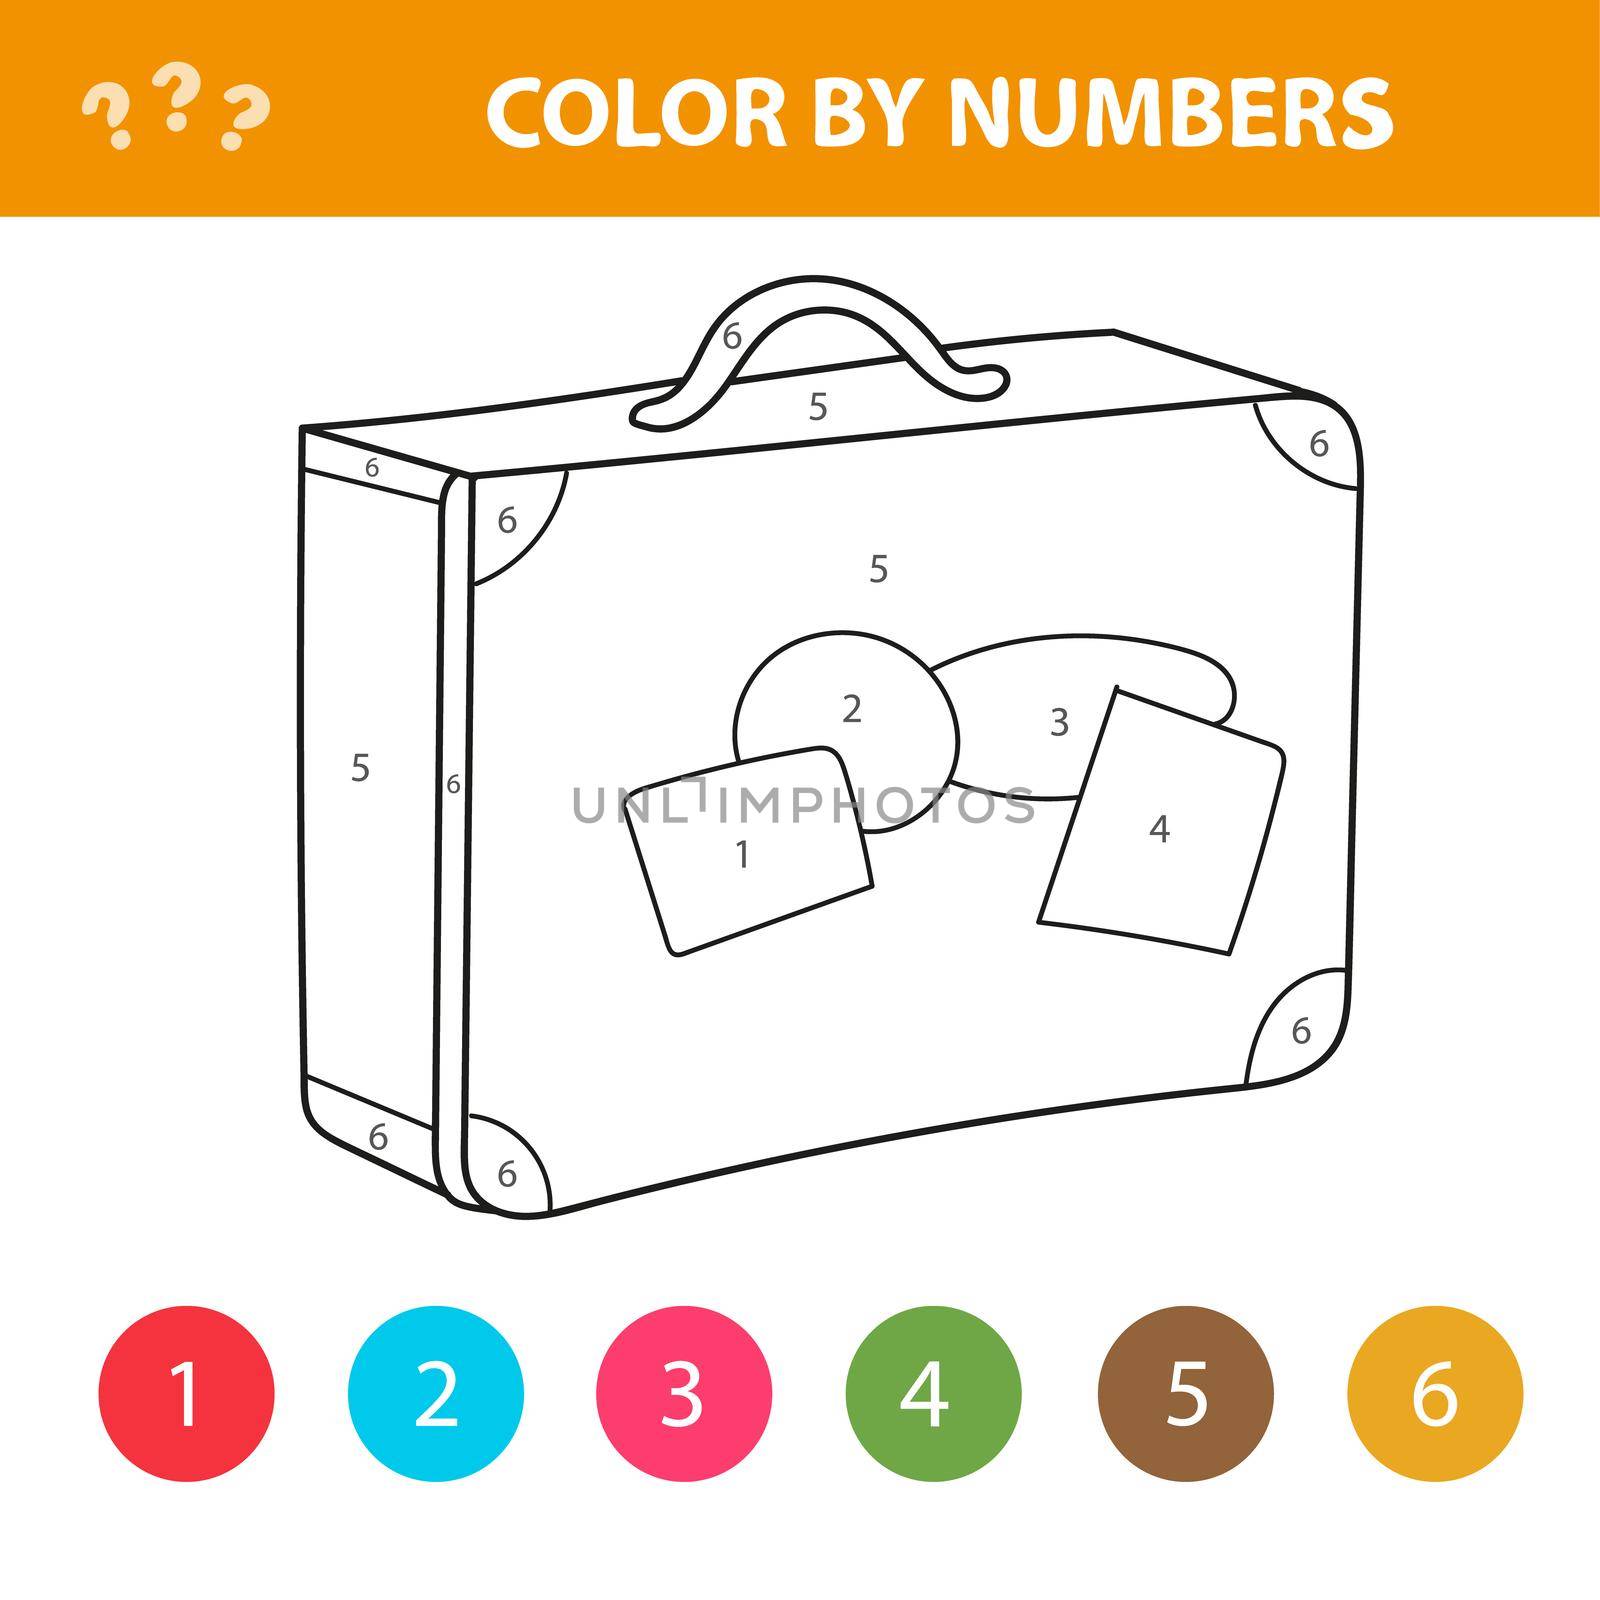 Travel suitcase. Color by numbers. Coloring book for children. Summer coloring.